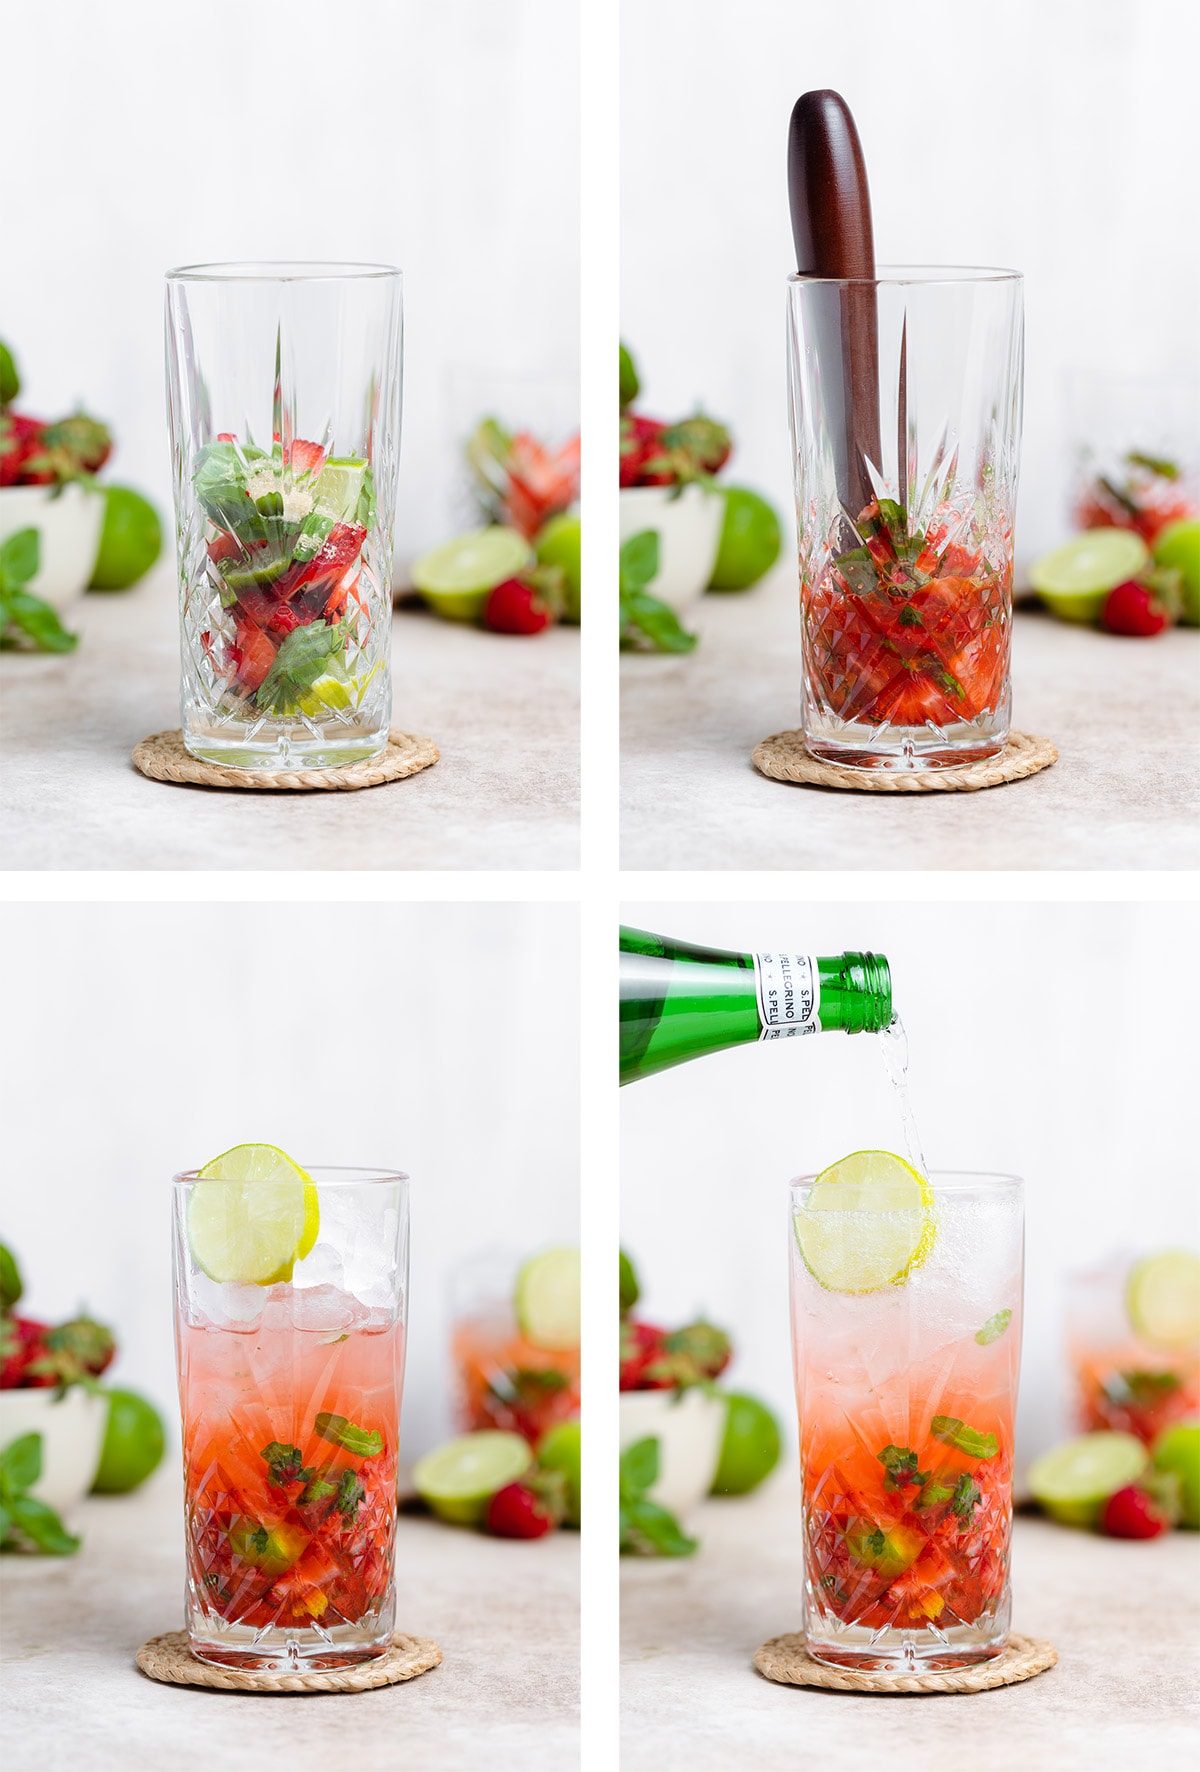 Step by step process of making a strawberry mojito from mashing everything using a muddler to adding alcohol, ice, and sparkling water.